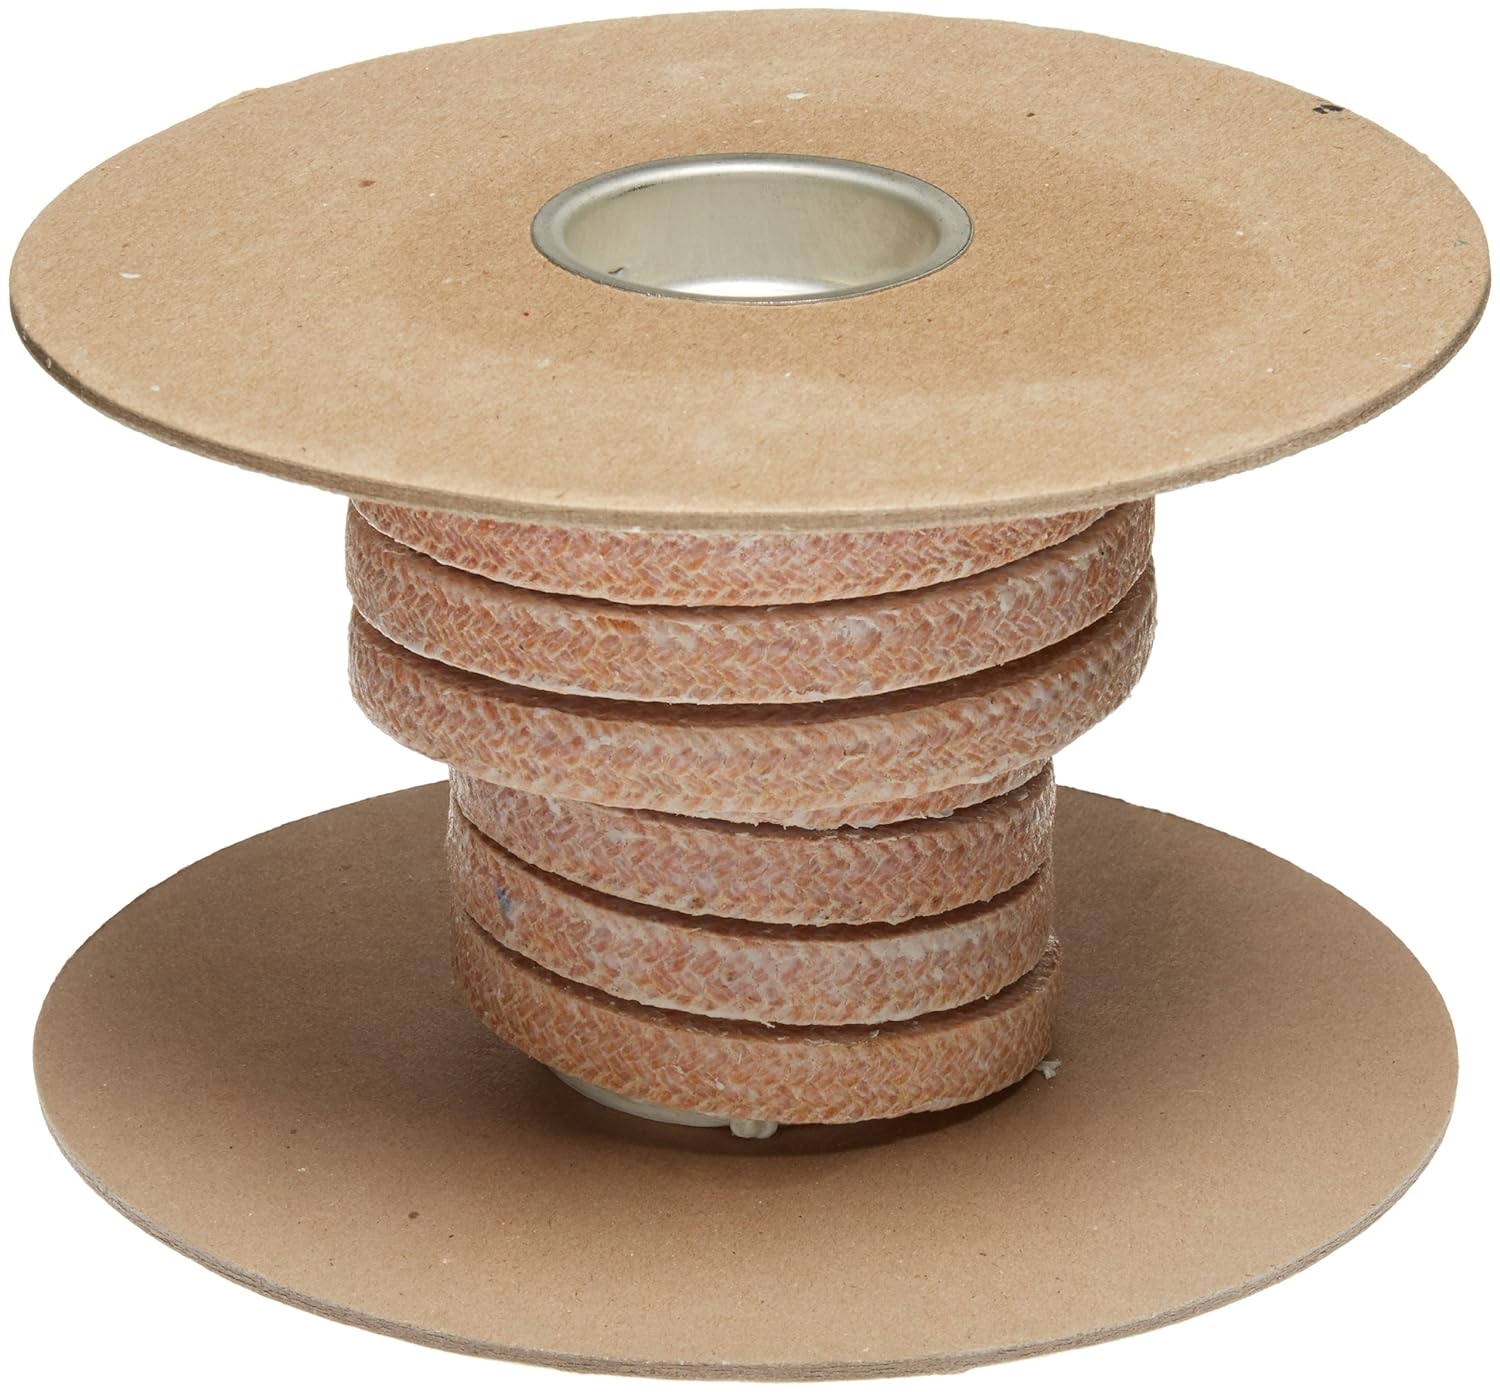 Palmetto 1392S Series Composite with PTFE Compression Packing Seal, Brown, 1/2" Square, 10' Length